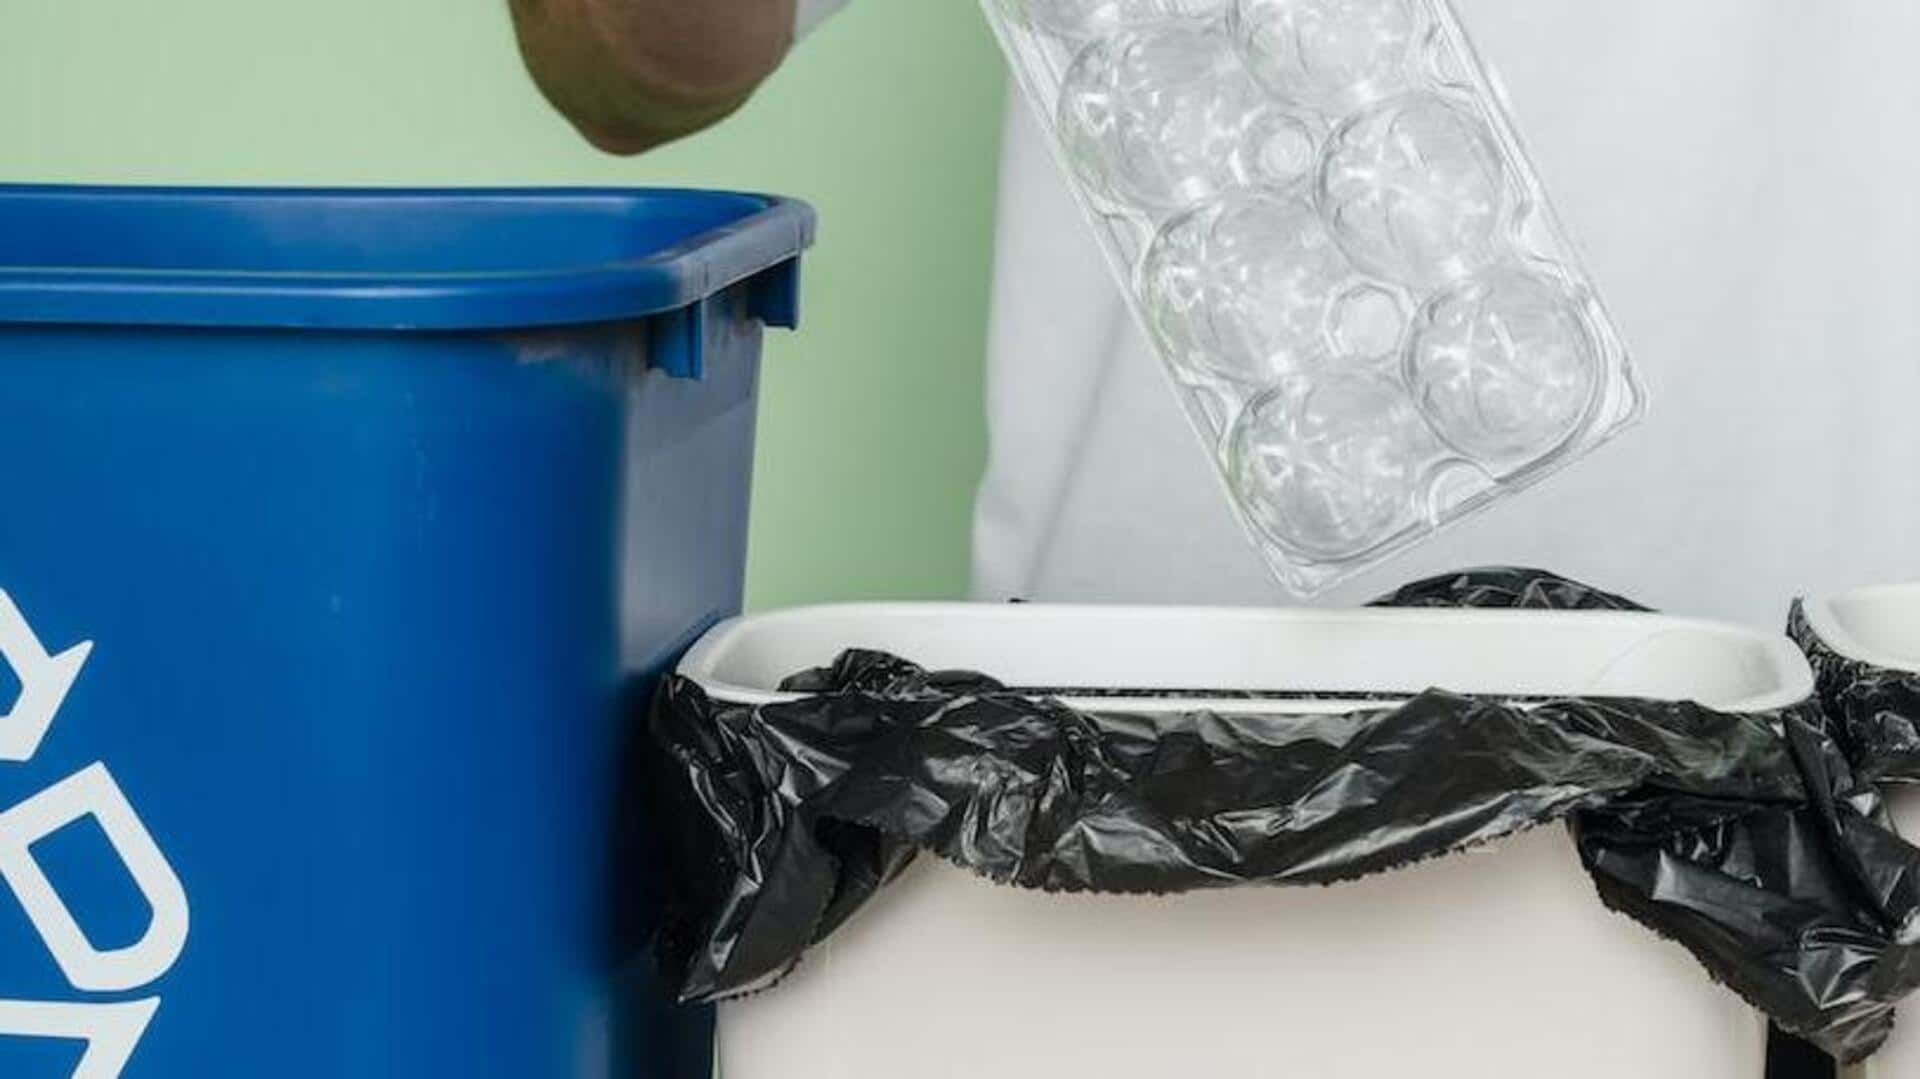 How to correctly dispose of plastic items